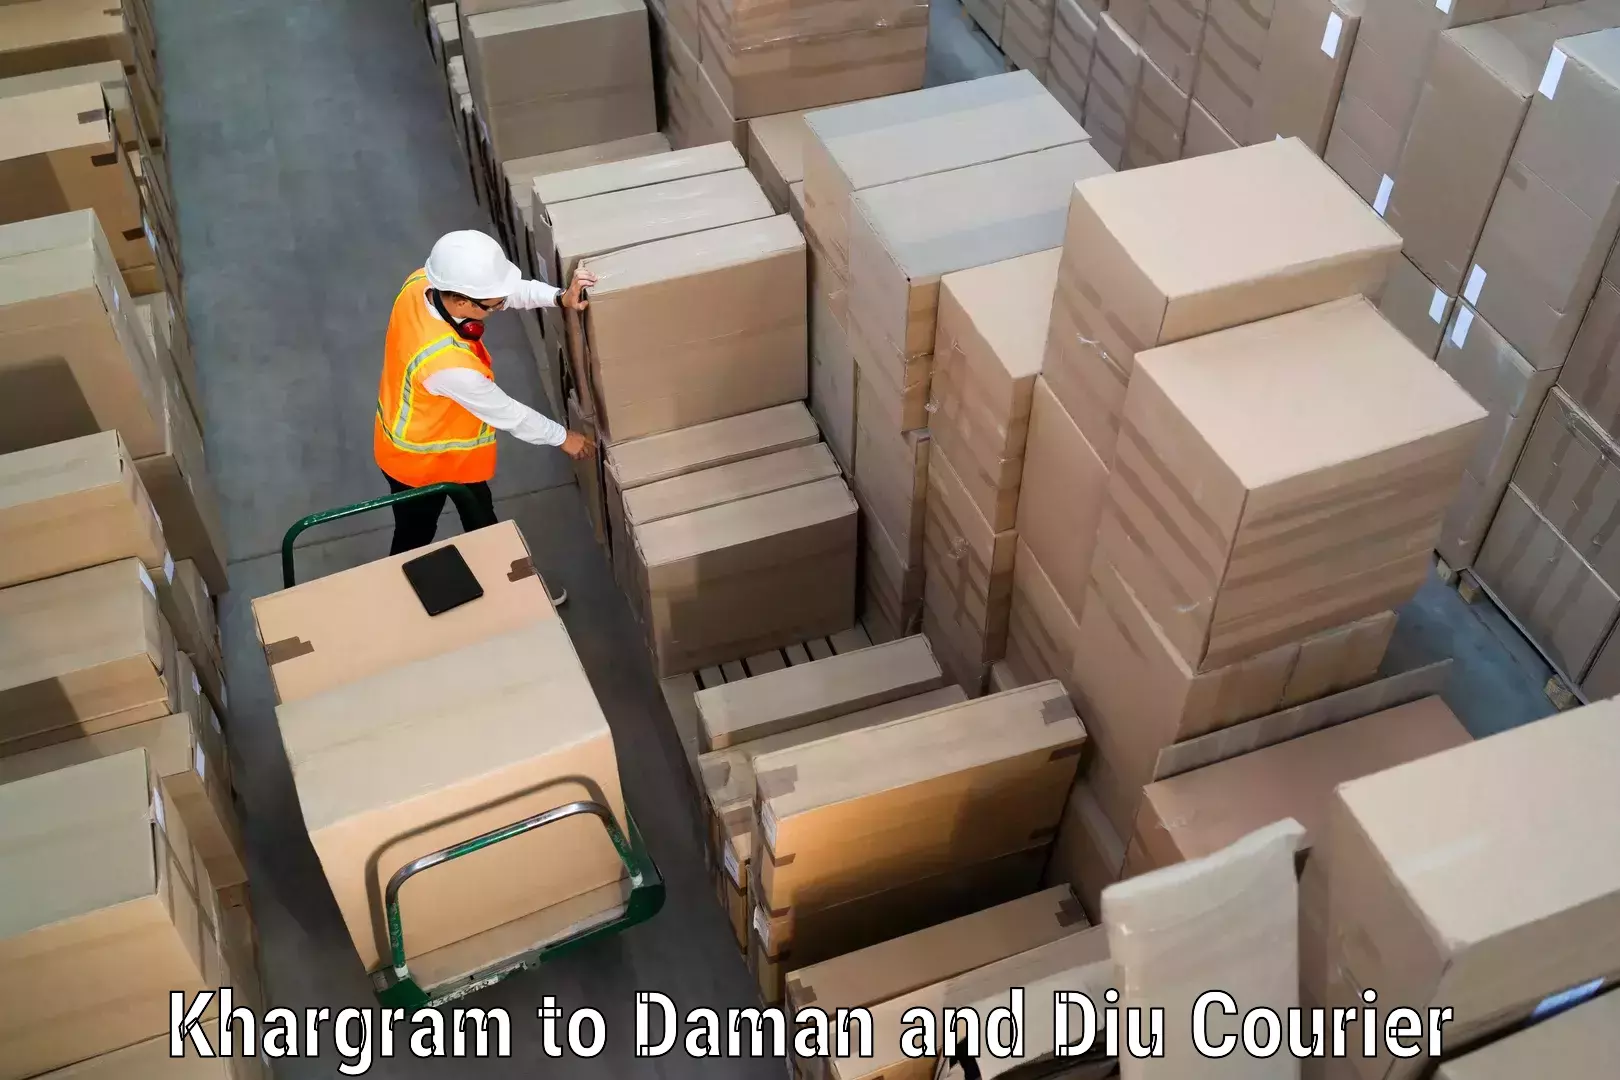 Personal parcel delivery Khargram to Diu